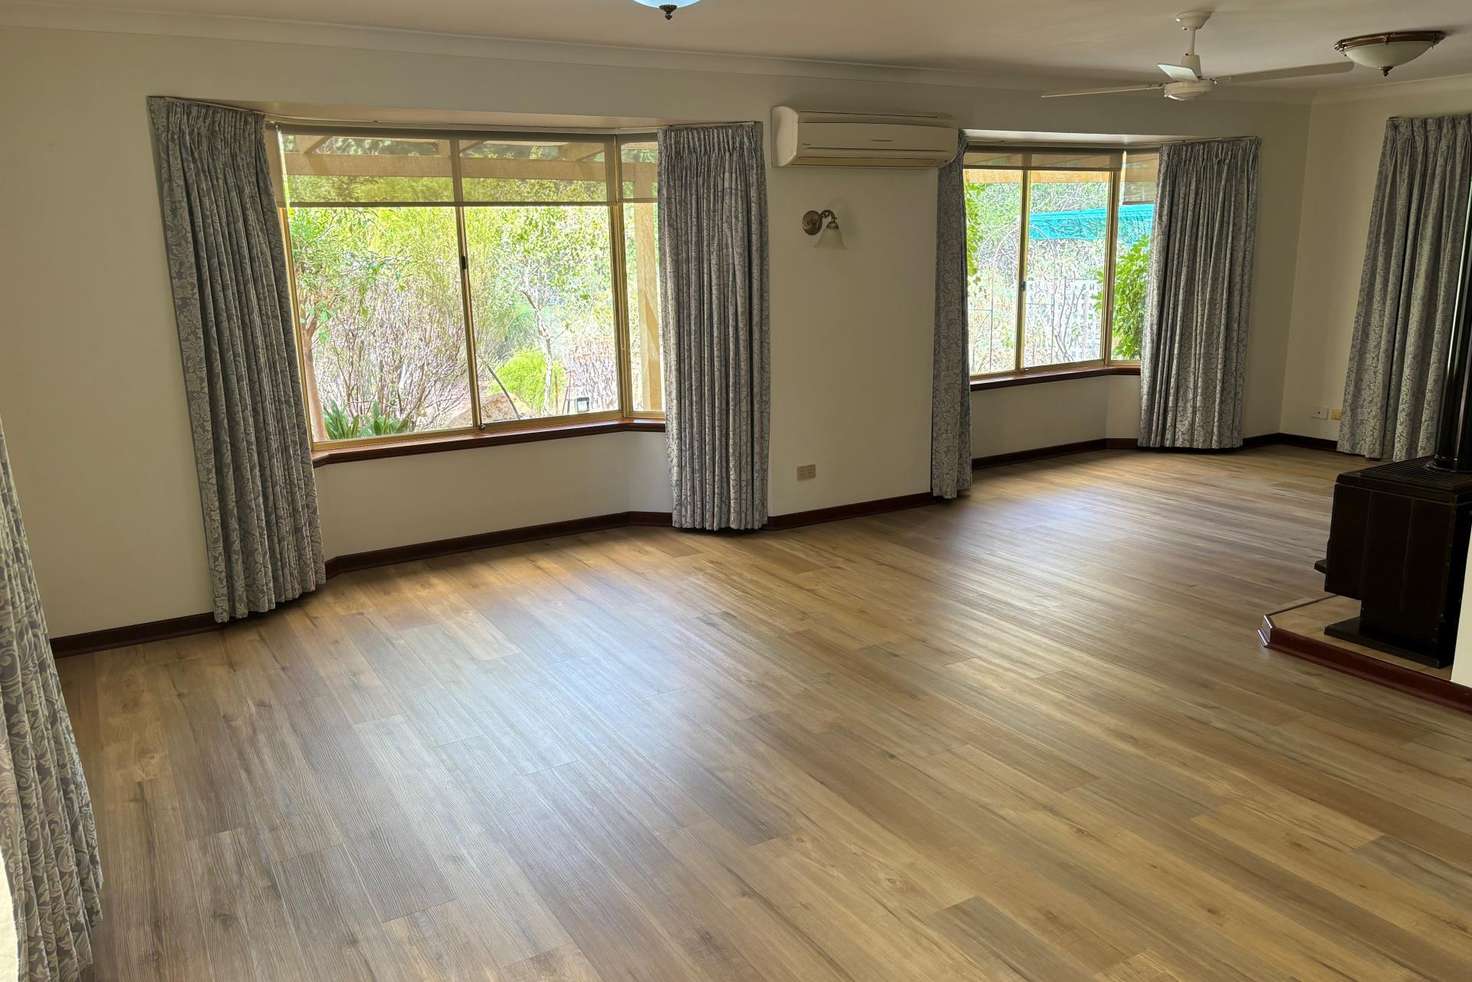 Main view of Homely house listing, 1825 Jacoby Street, Mundaring WA 6073